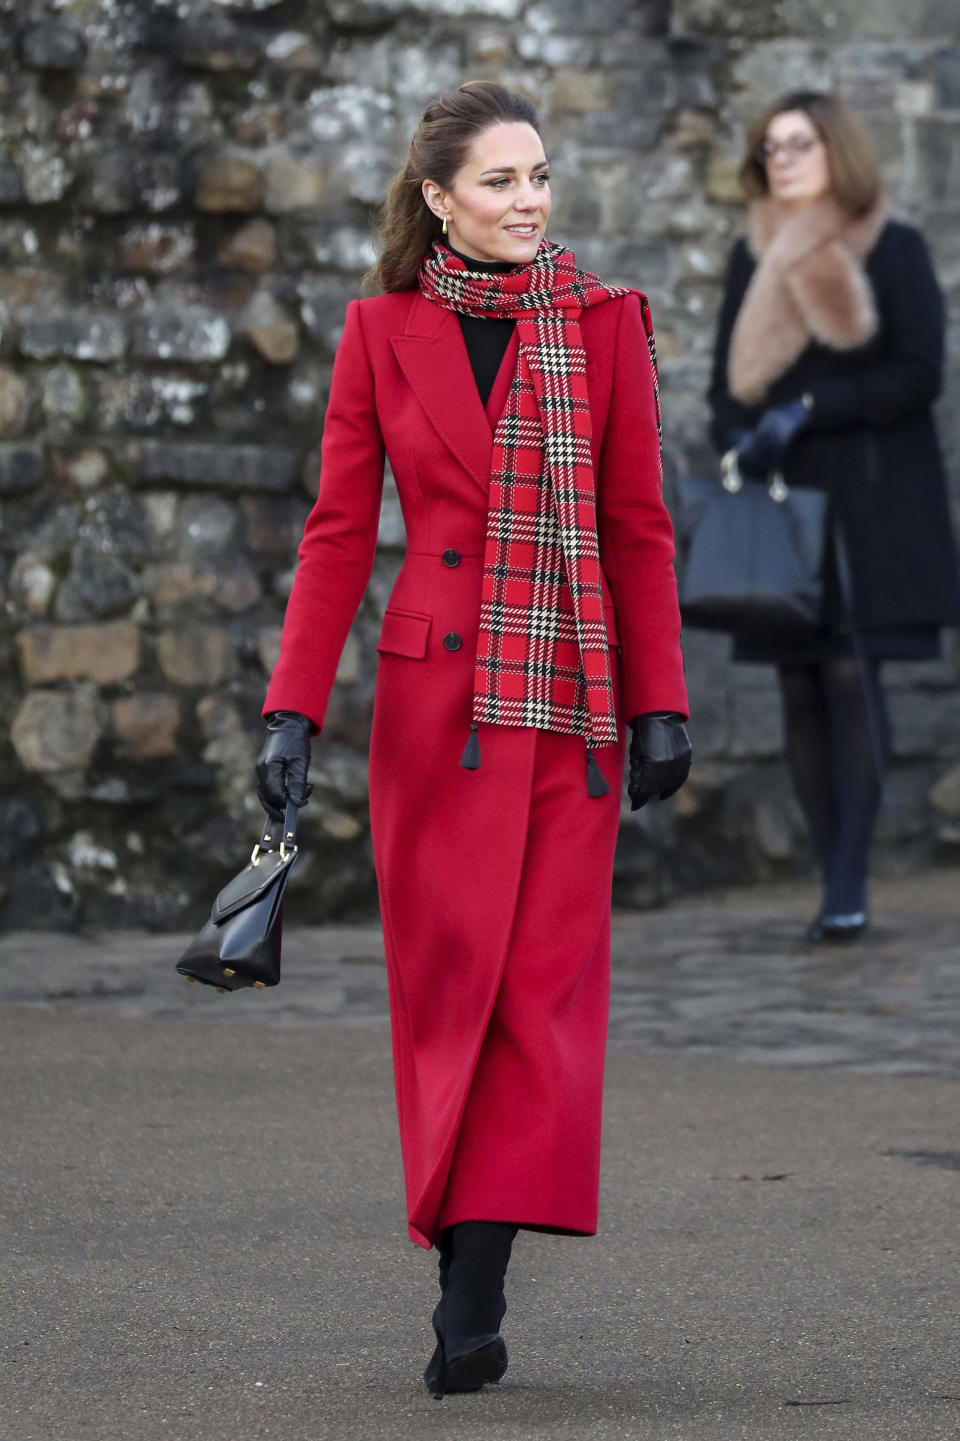 Britain's Kate Duchess of Cambridge at Cardiff Castle on Tuesday Dec. 8, 2020, in Cardiff, Wales. Prince William and Kate Duchess of Cambridge are undertaking a short tour of the UK by train ahead of the Christmas holidays to pay tribute to the inspiring work in local communities. (Chris Jackson/Pool via AP)